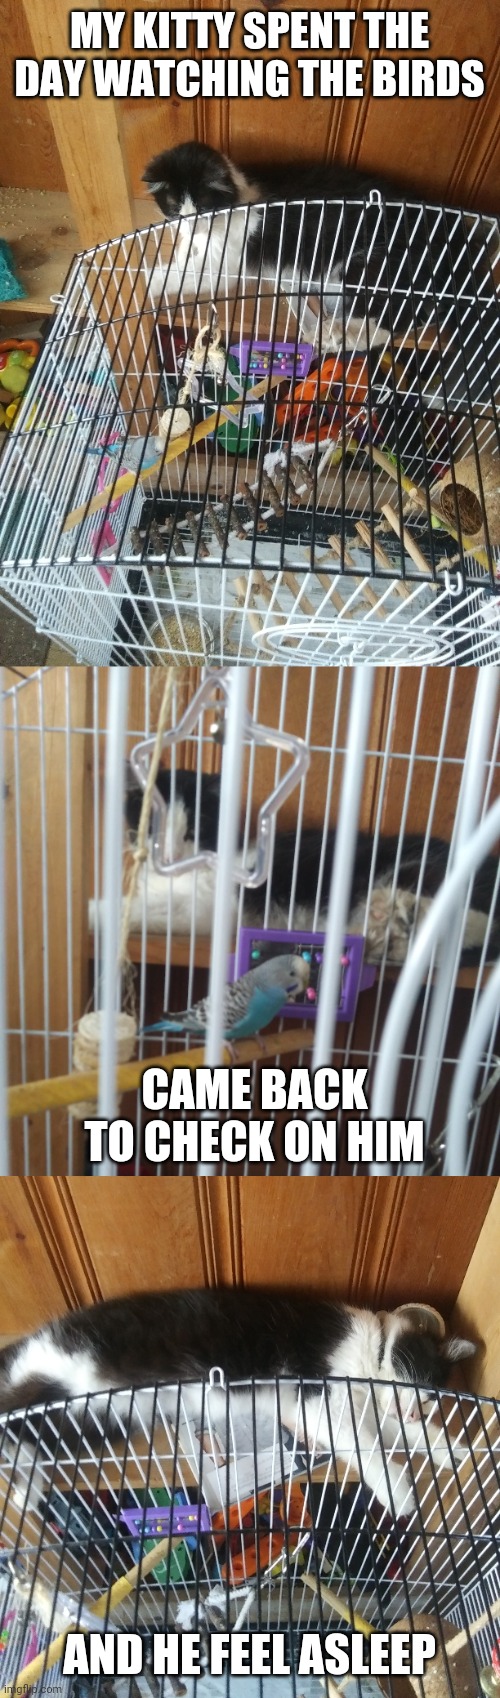 HE JUST LIKES TO WATCH THEM | MY KITTY SPENT THE DAY WATCHING THE BIRDS; CAME BACK TO CHECK ON HIM; AND HE FEEL ASLEEP | image tagged in cats,funny cats,birds,sleeping cat | made w/ Imgflip meme maker